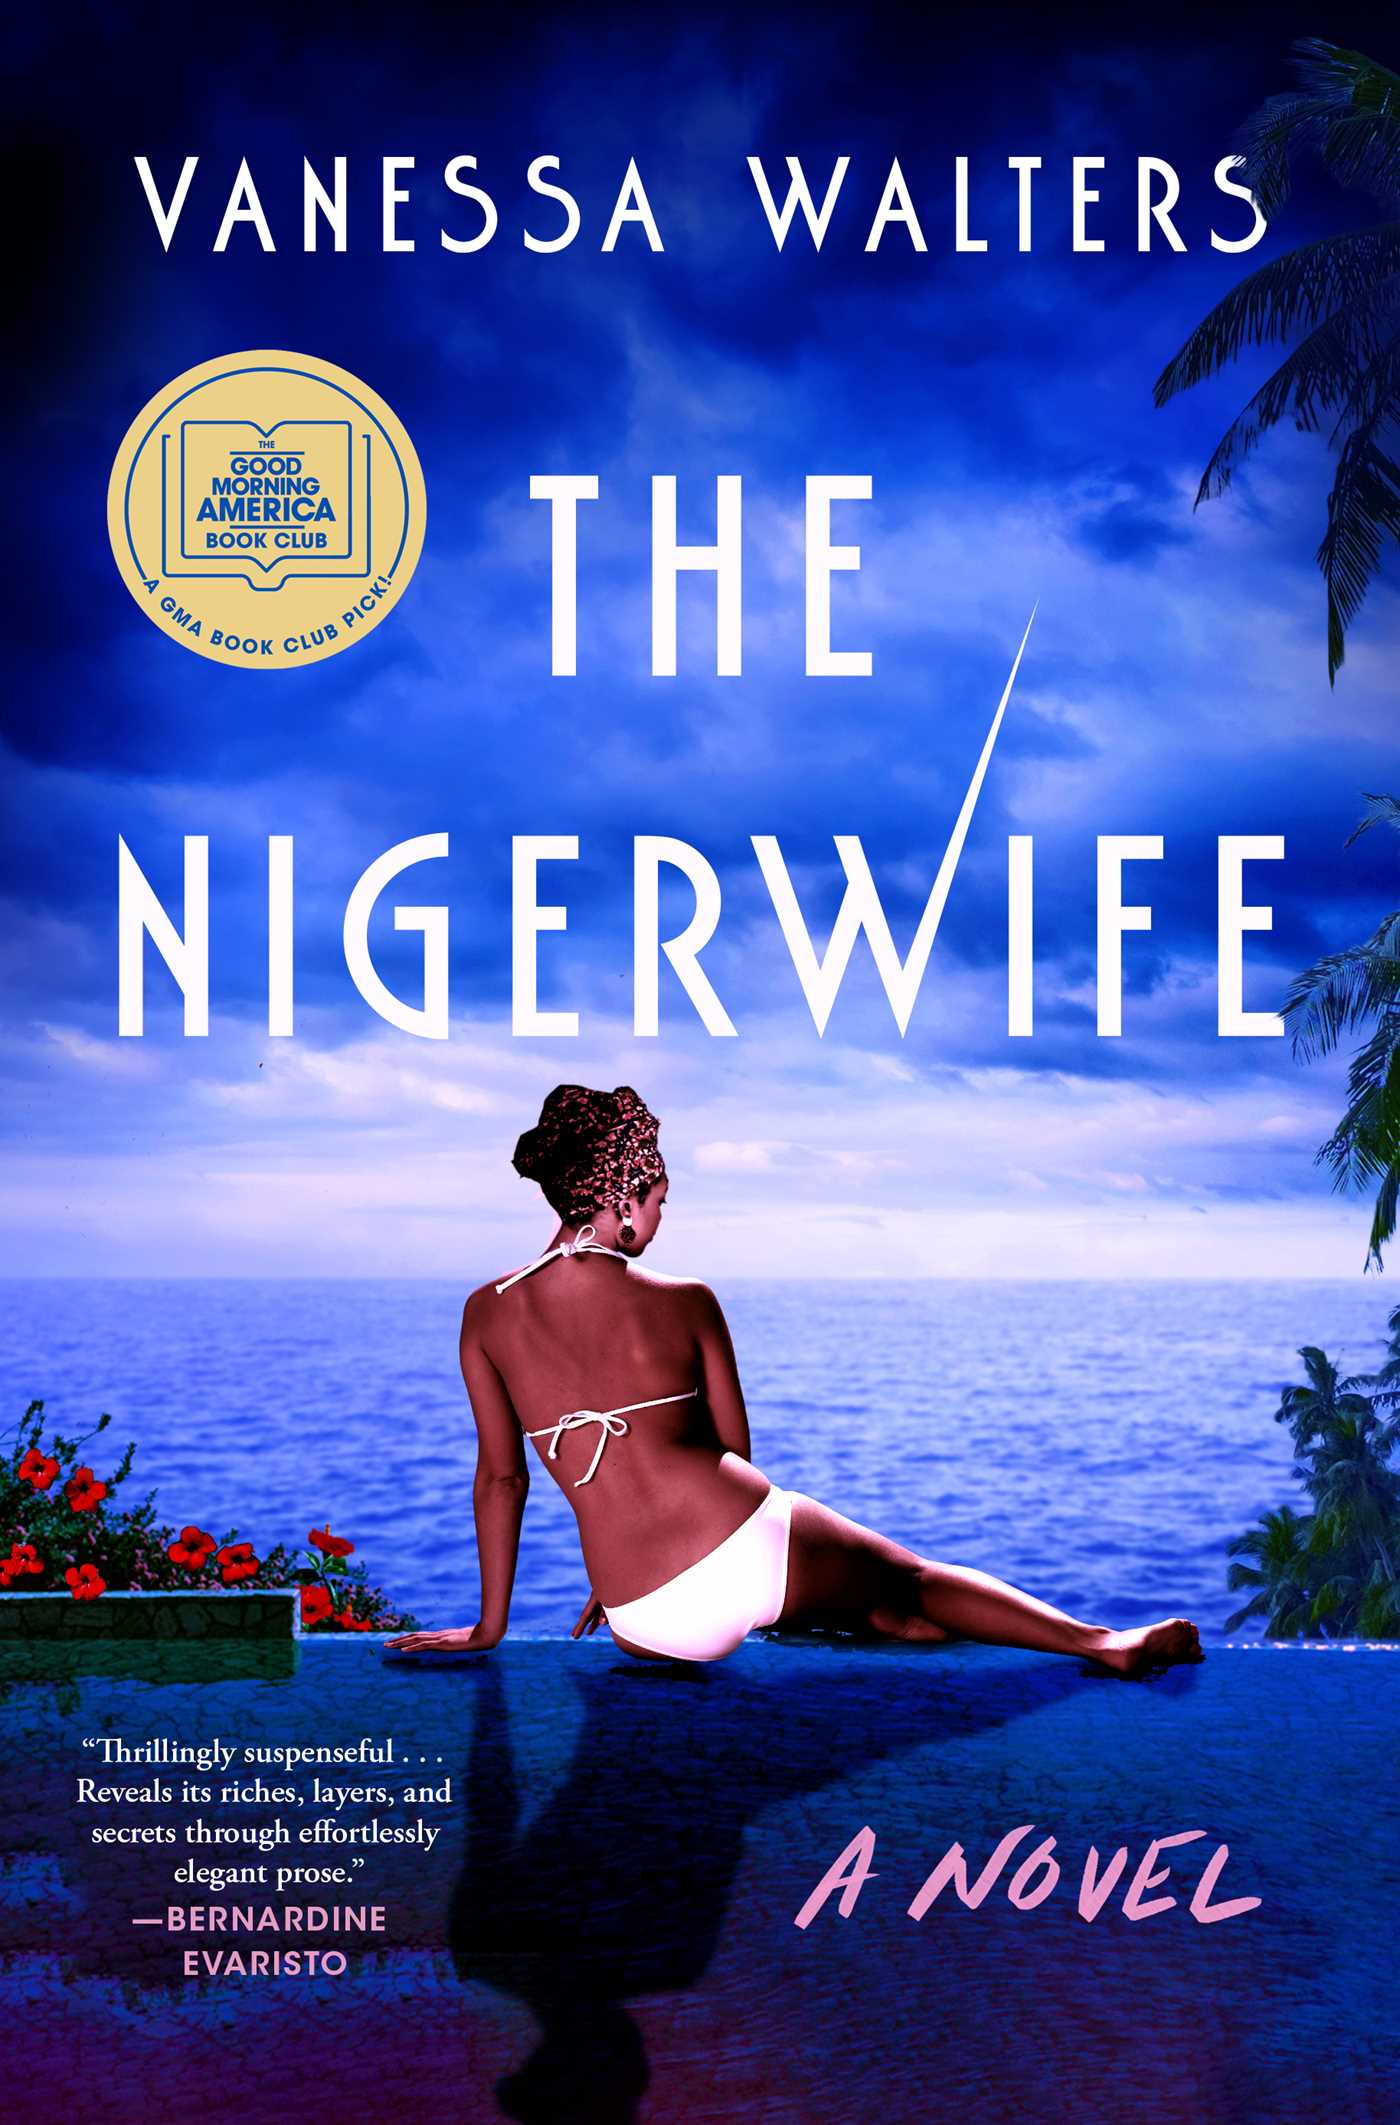 Image for "The Nigerwife"